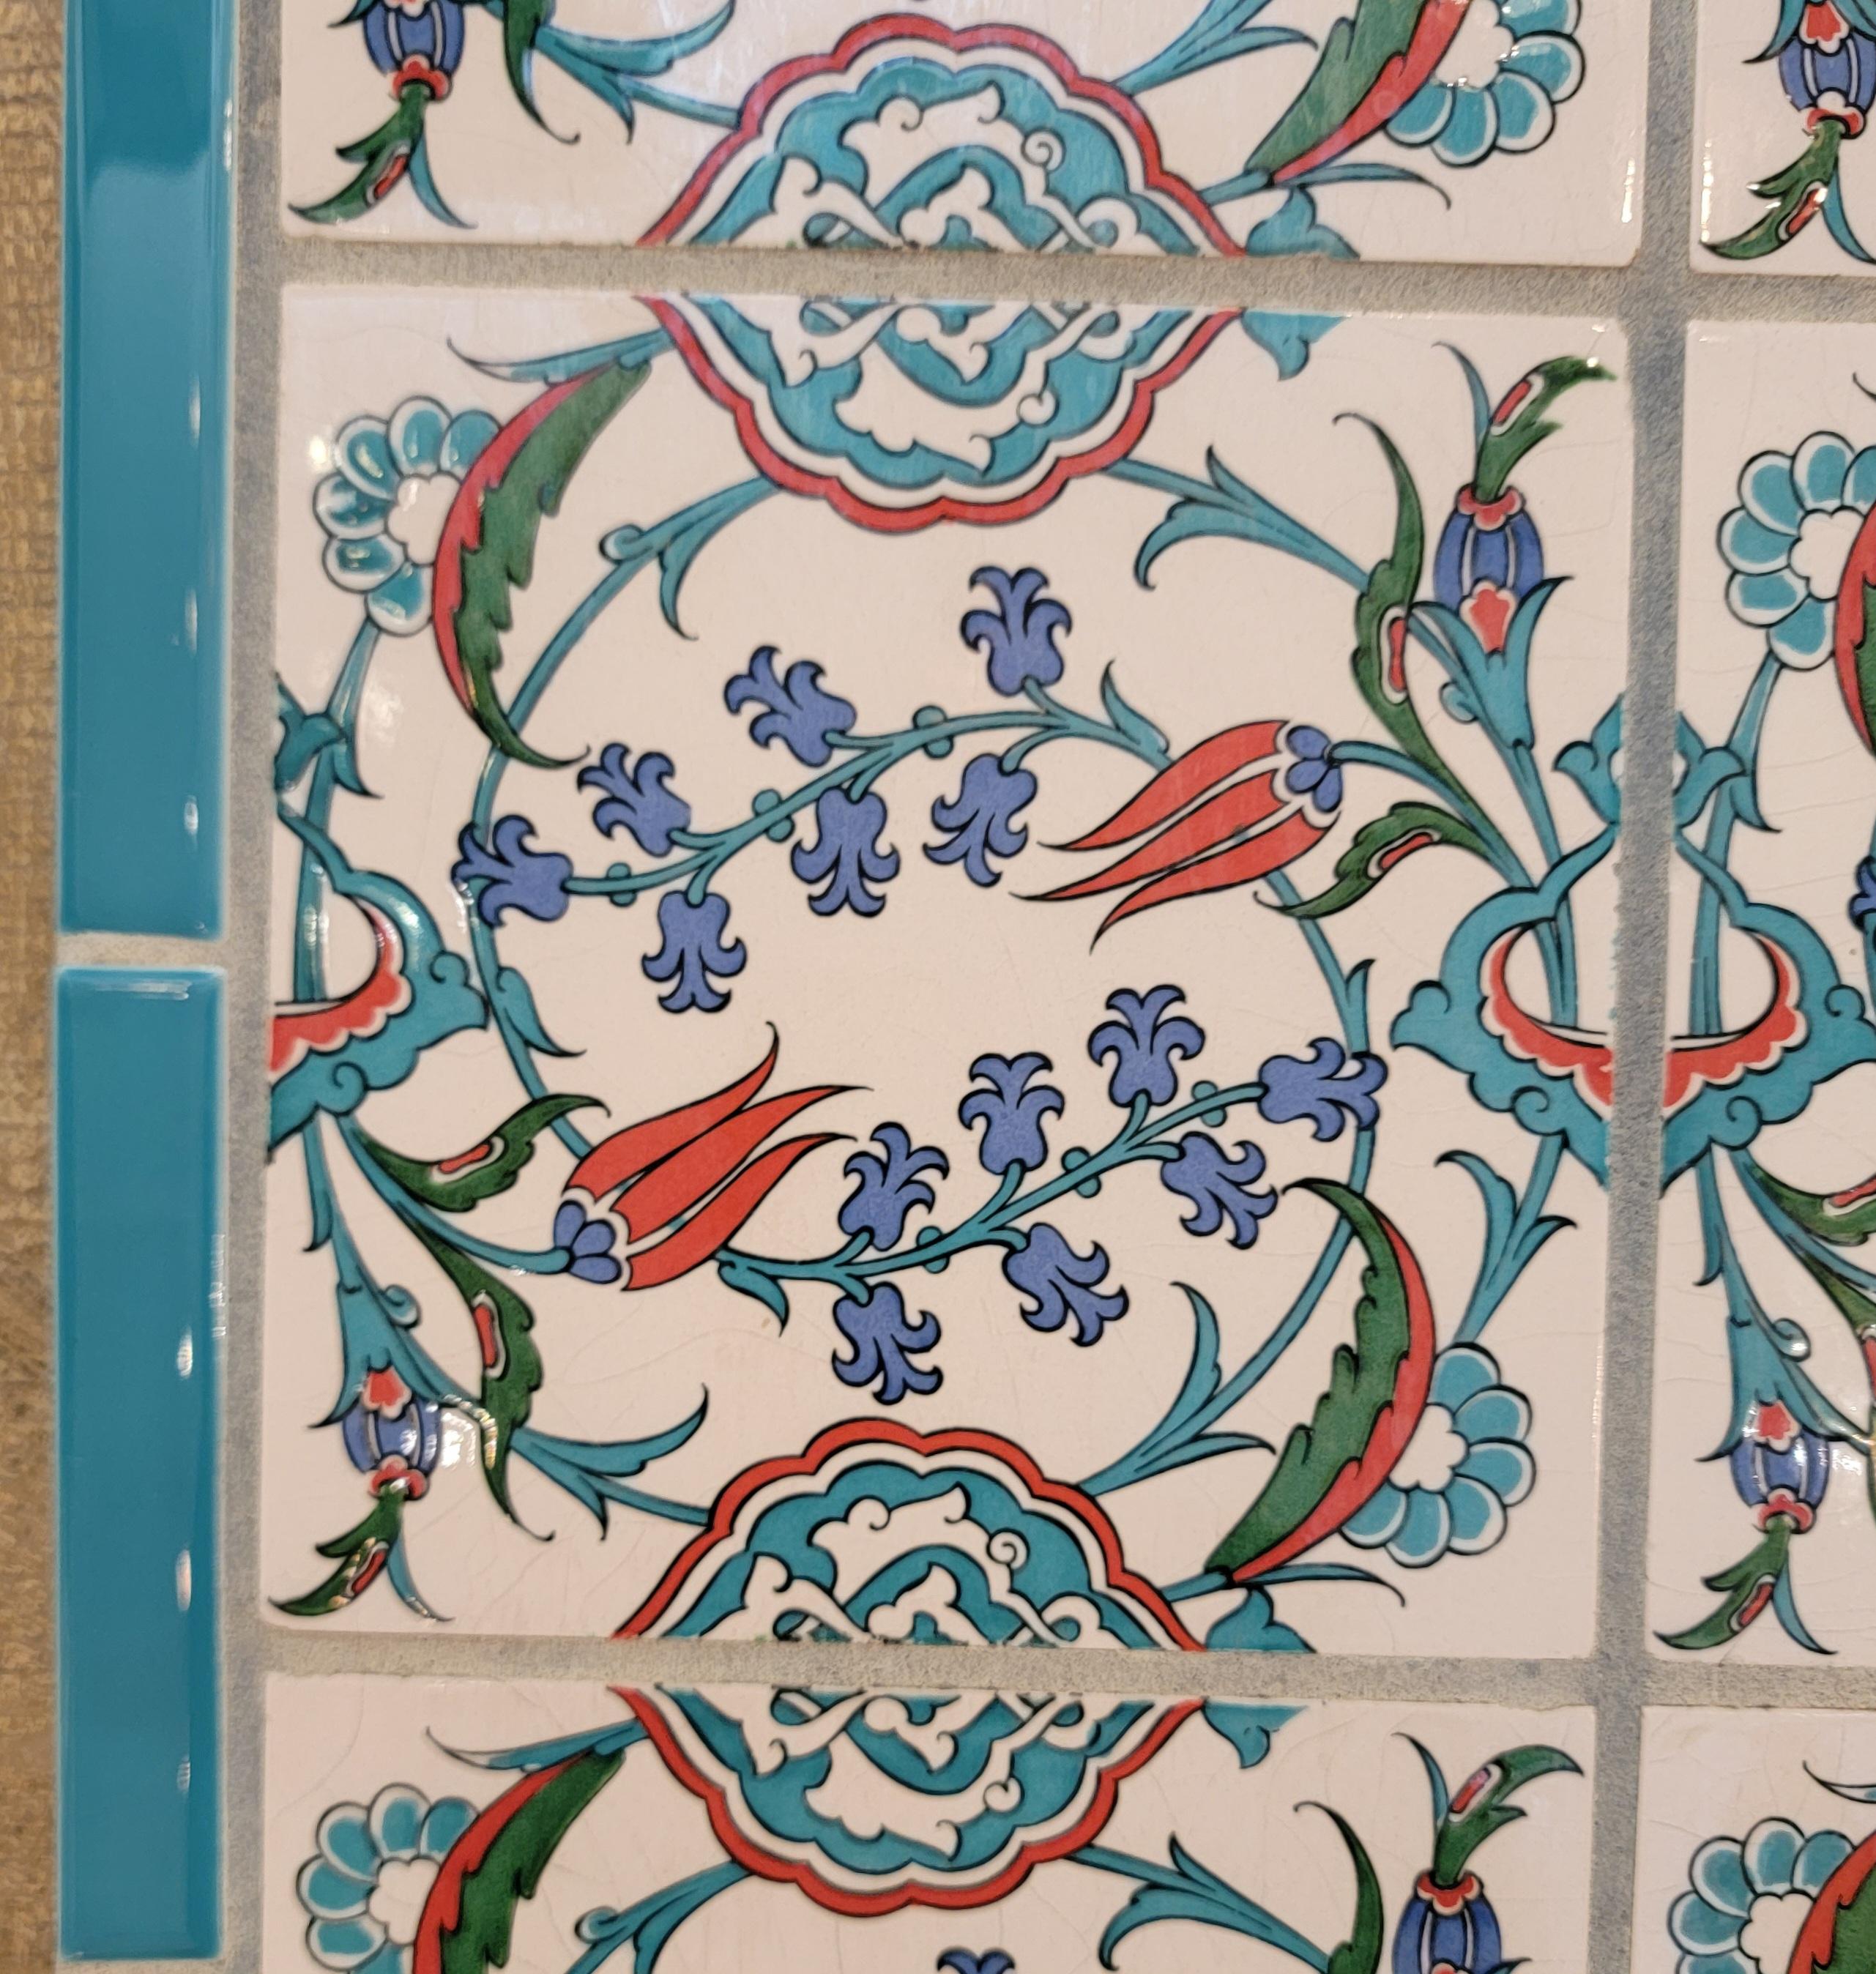 Blue Border Floral Tile Wall Art or Table Top Measures approx. - 18.5 wide x 37.5 high